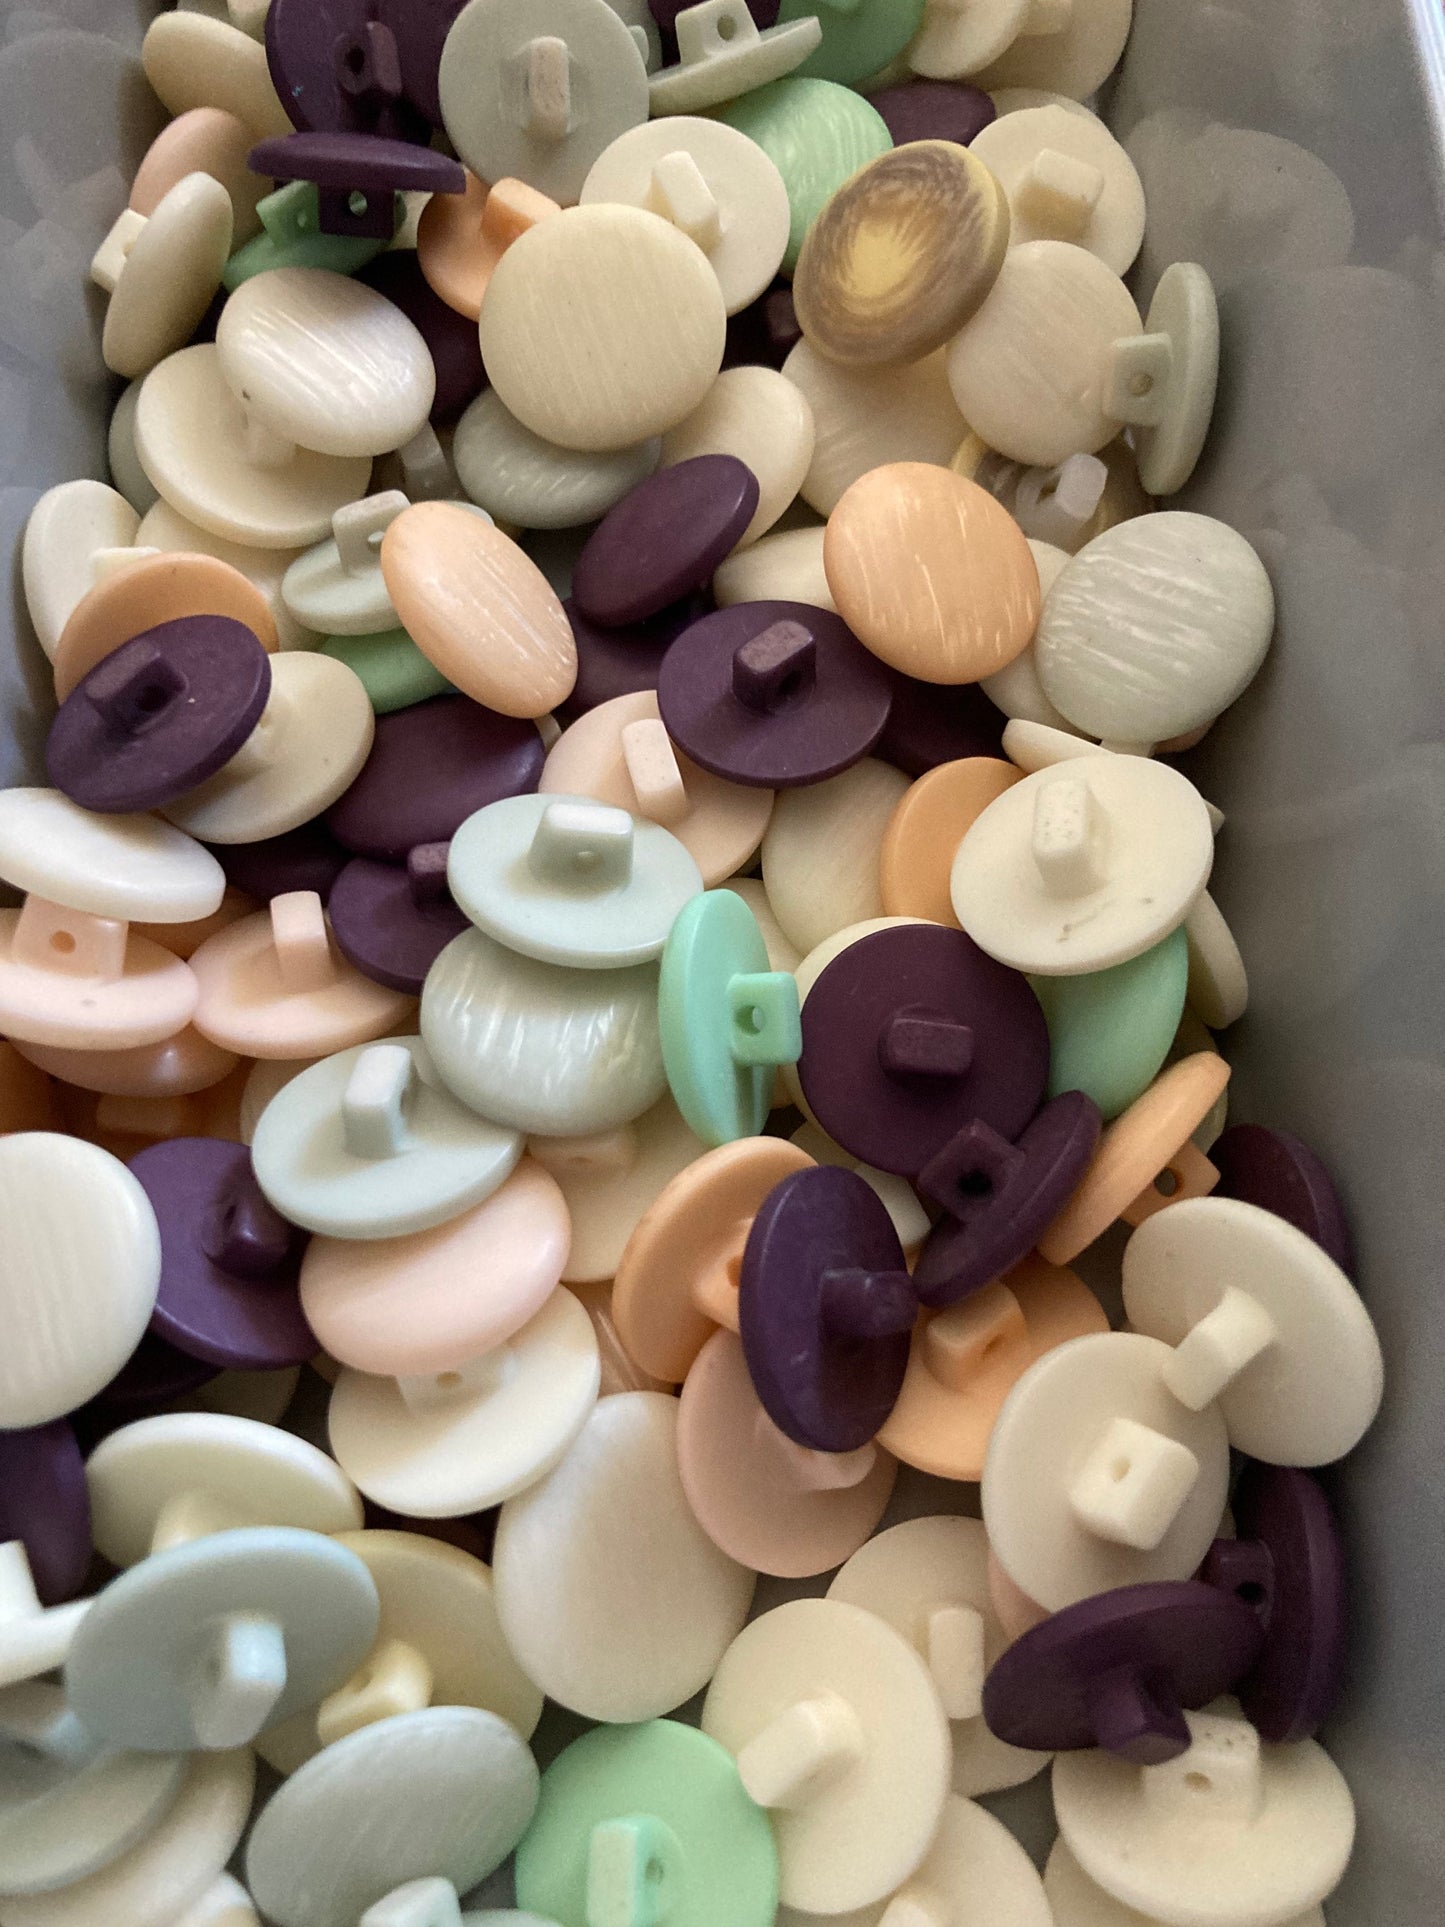 Job lot 18mm plastic buttons in cream violet and purple mint green pink 195 gms